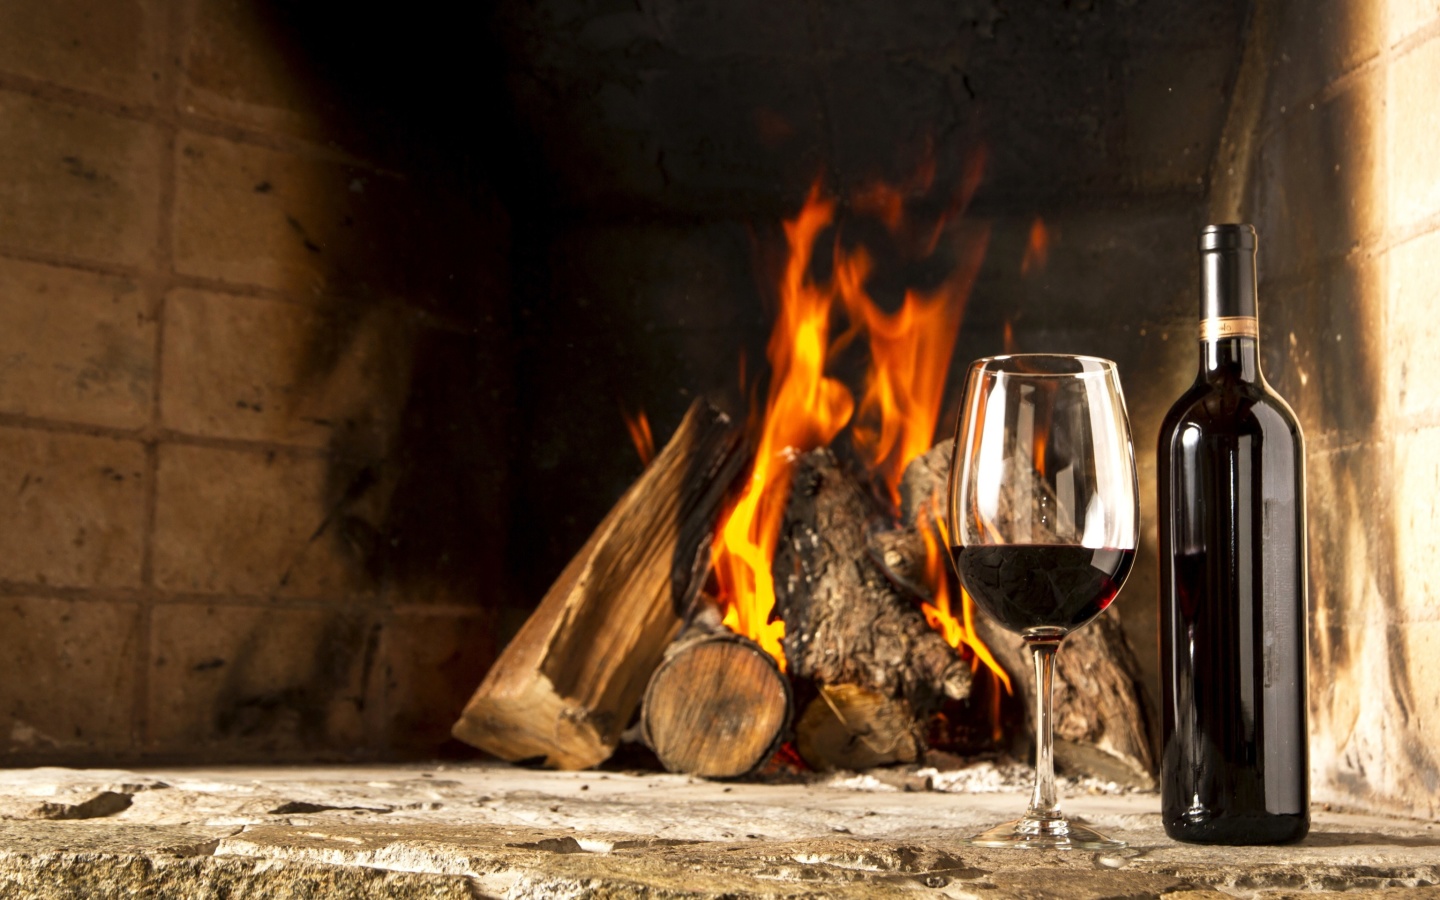 Wine and fireplace wallpaper 1440x900